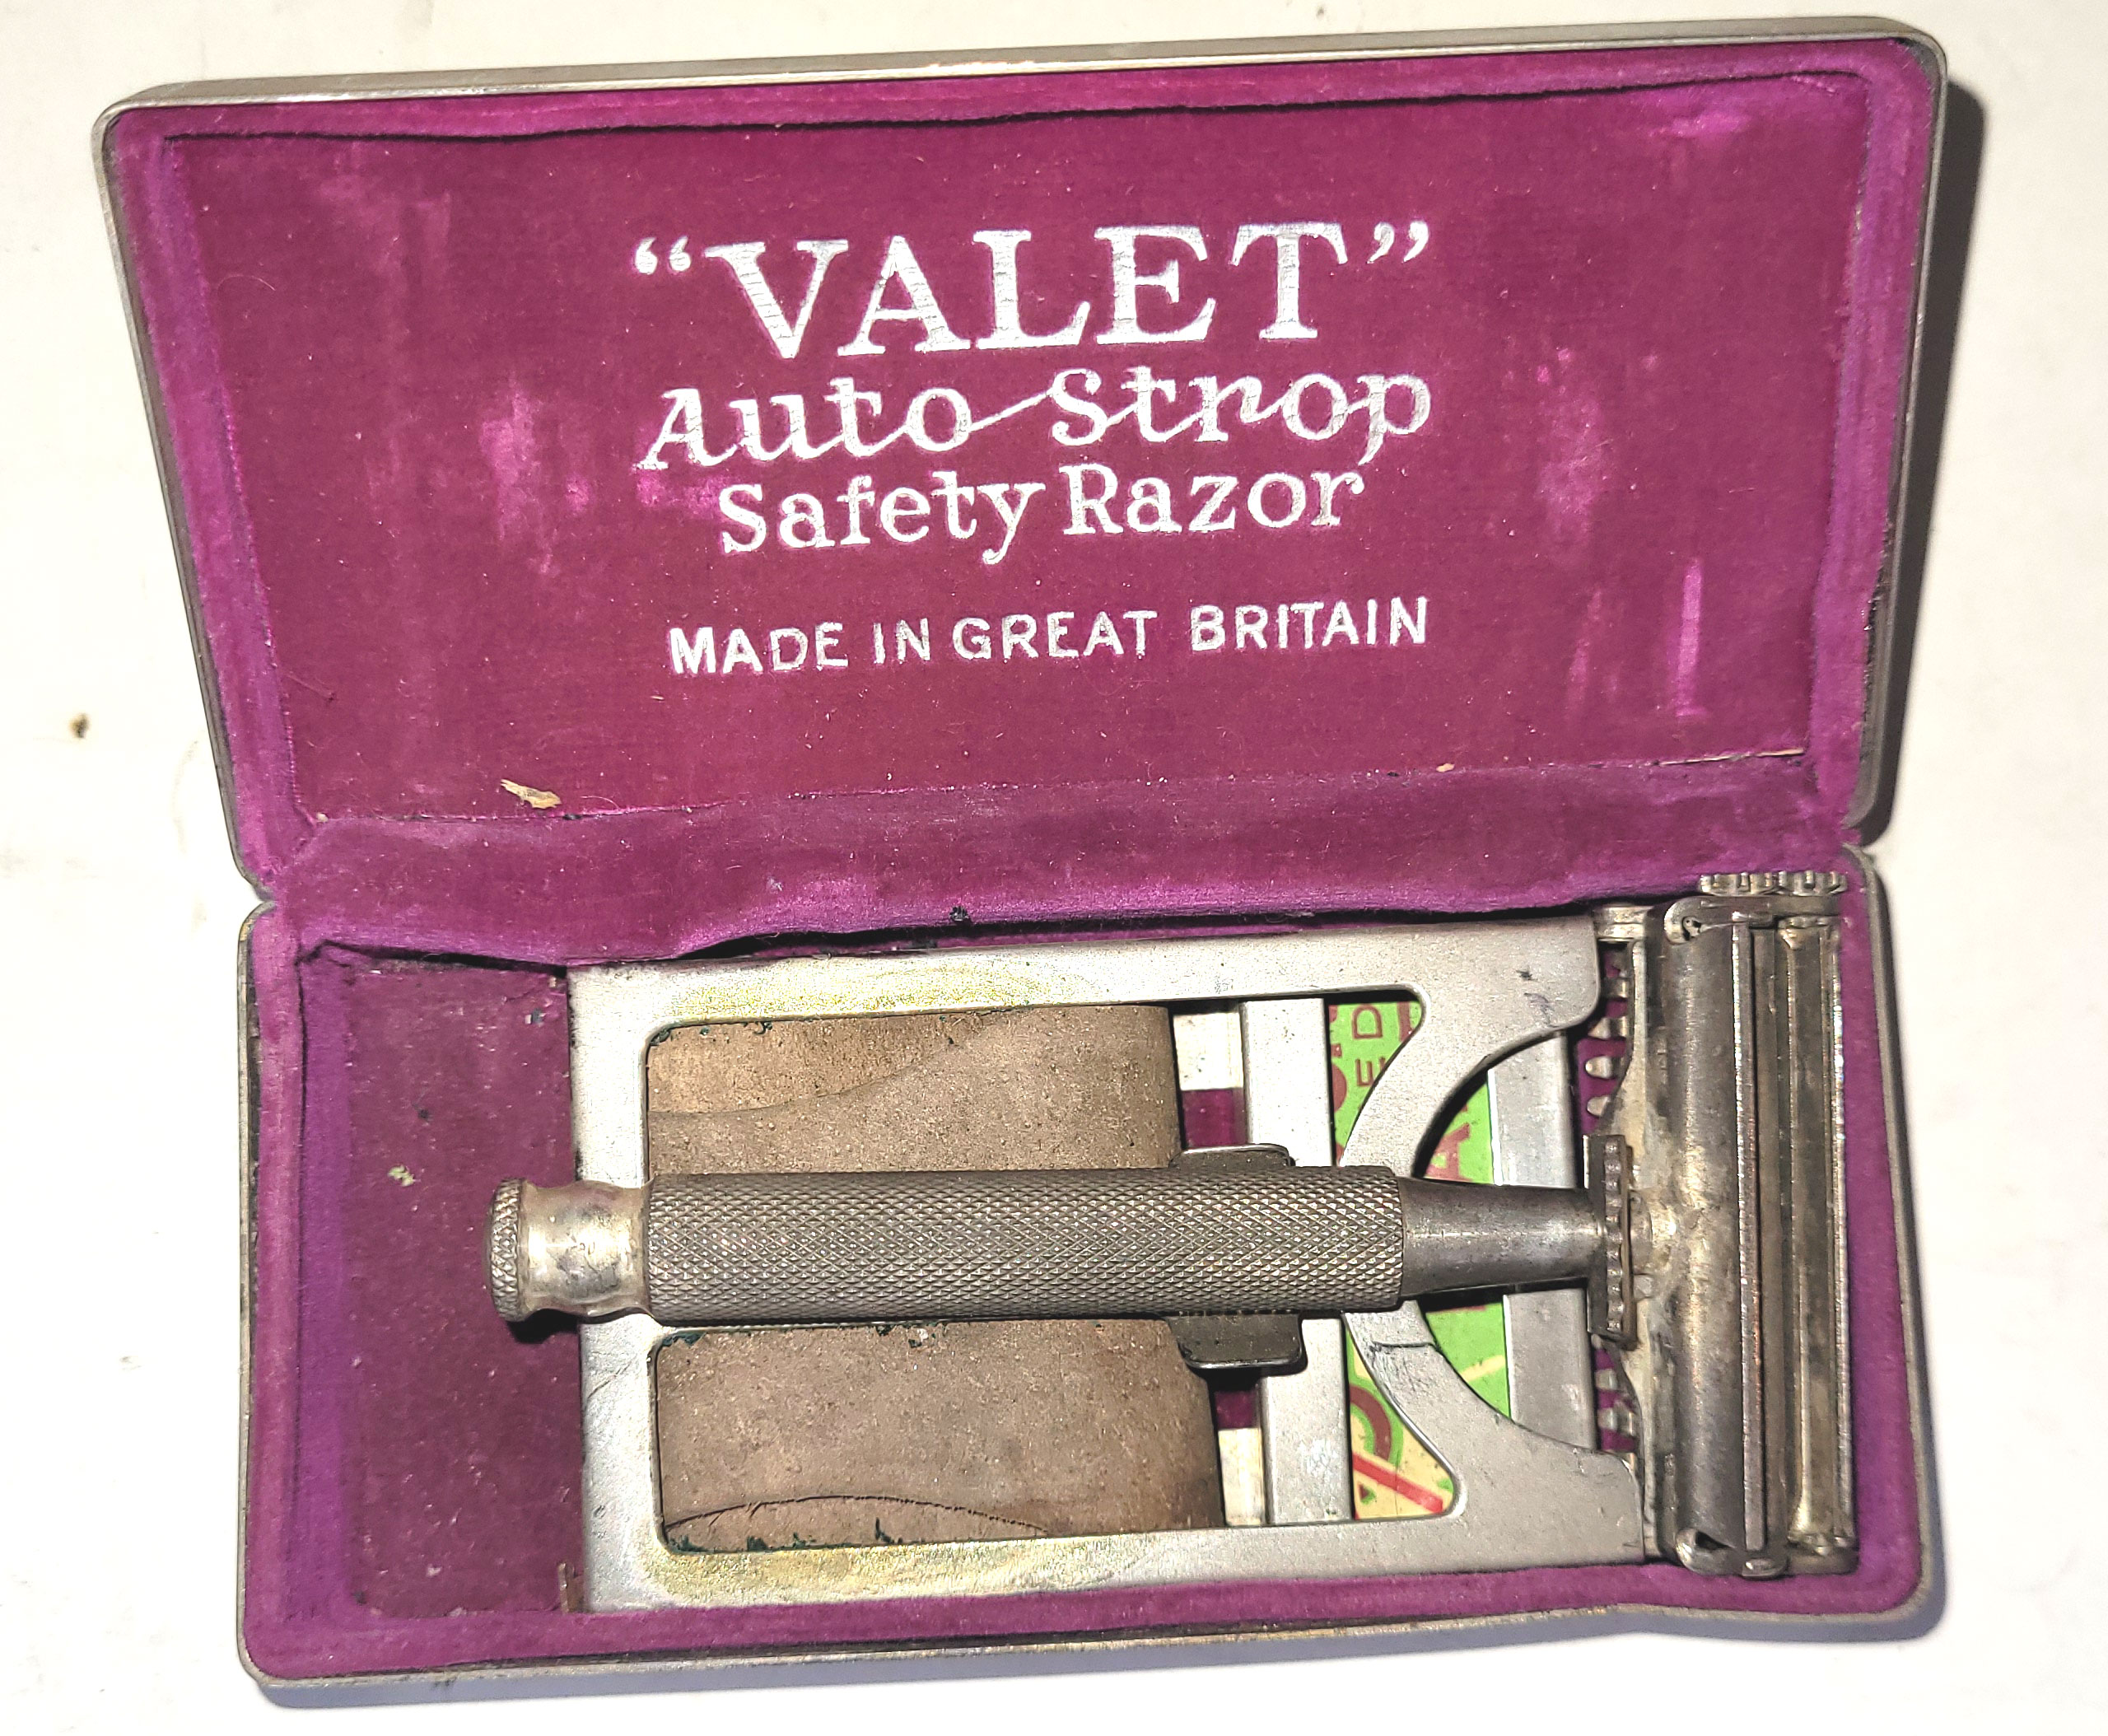 'Valet' quality razor similar to that used by Pte Tom Payne in Normandy £25